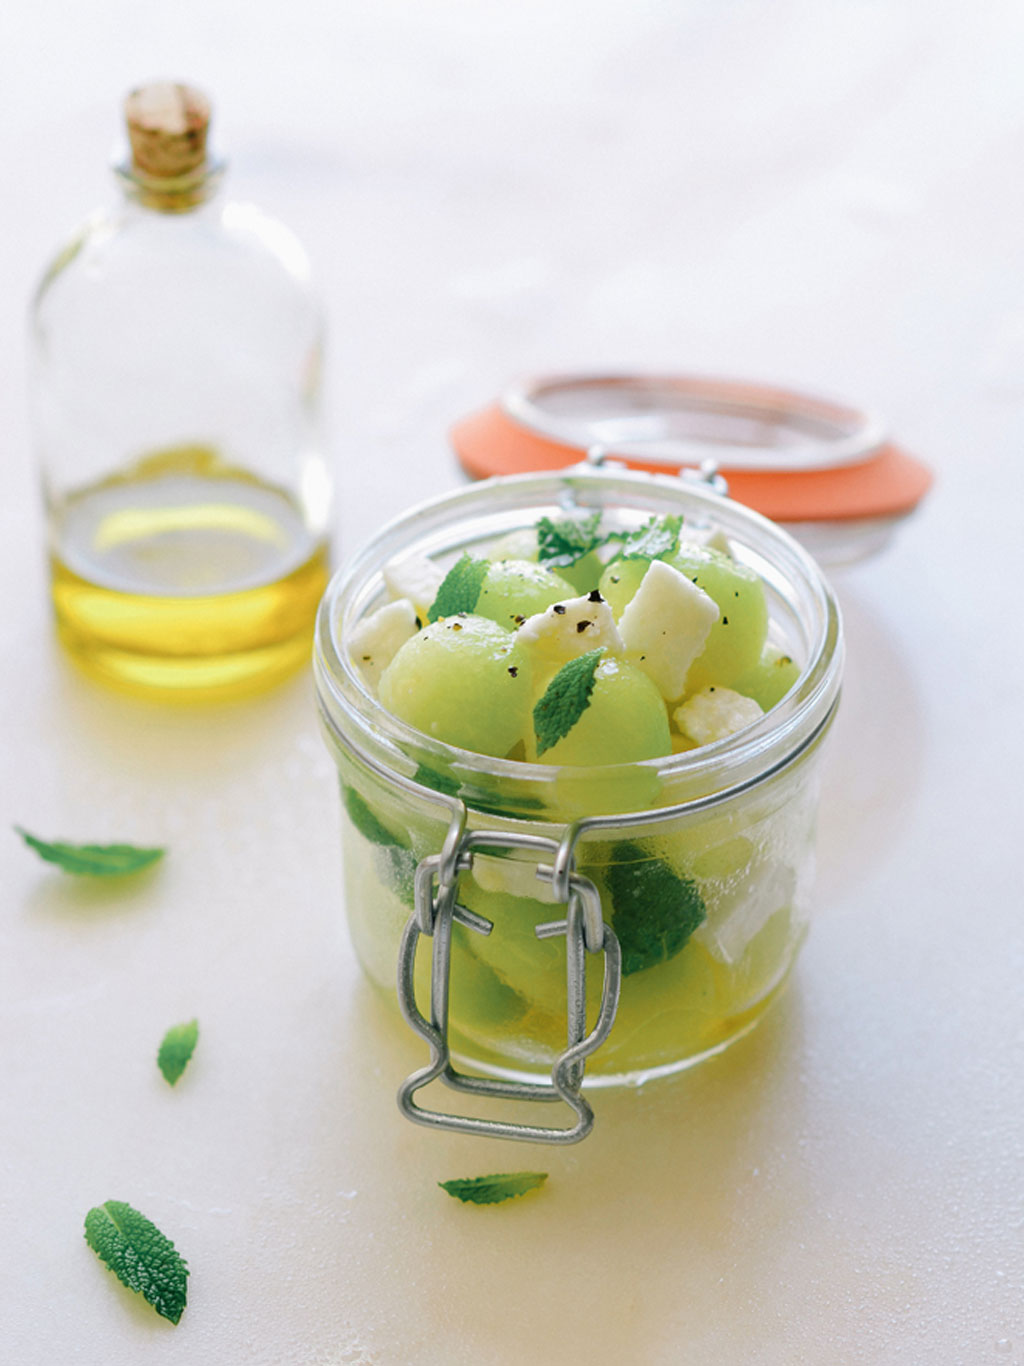 Mint and melon salad with olive oil